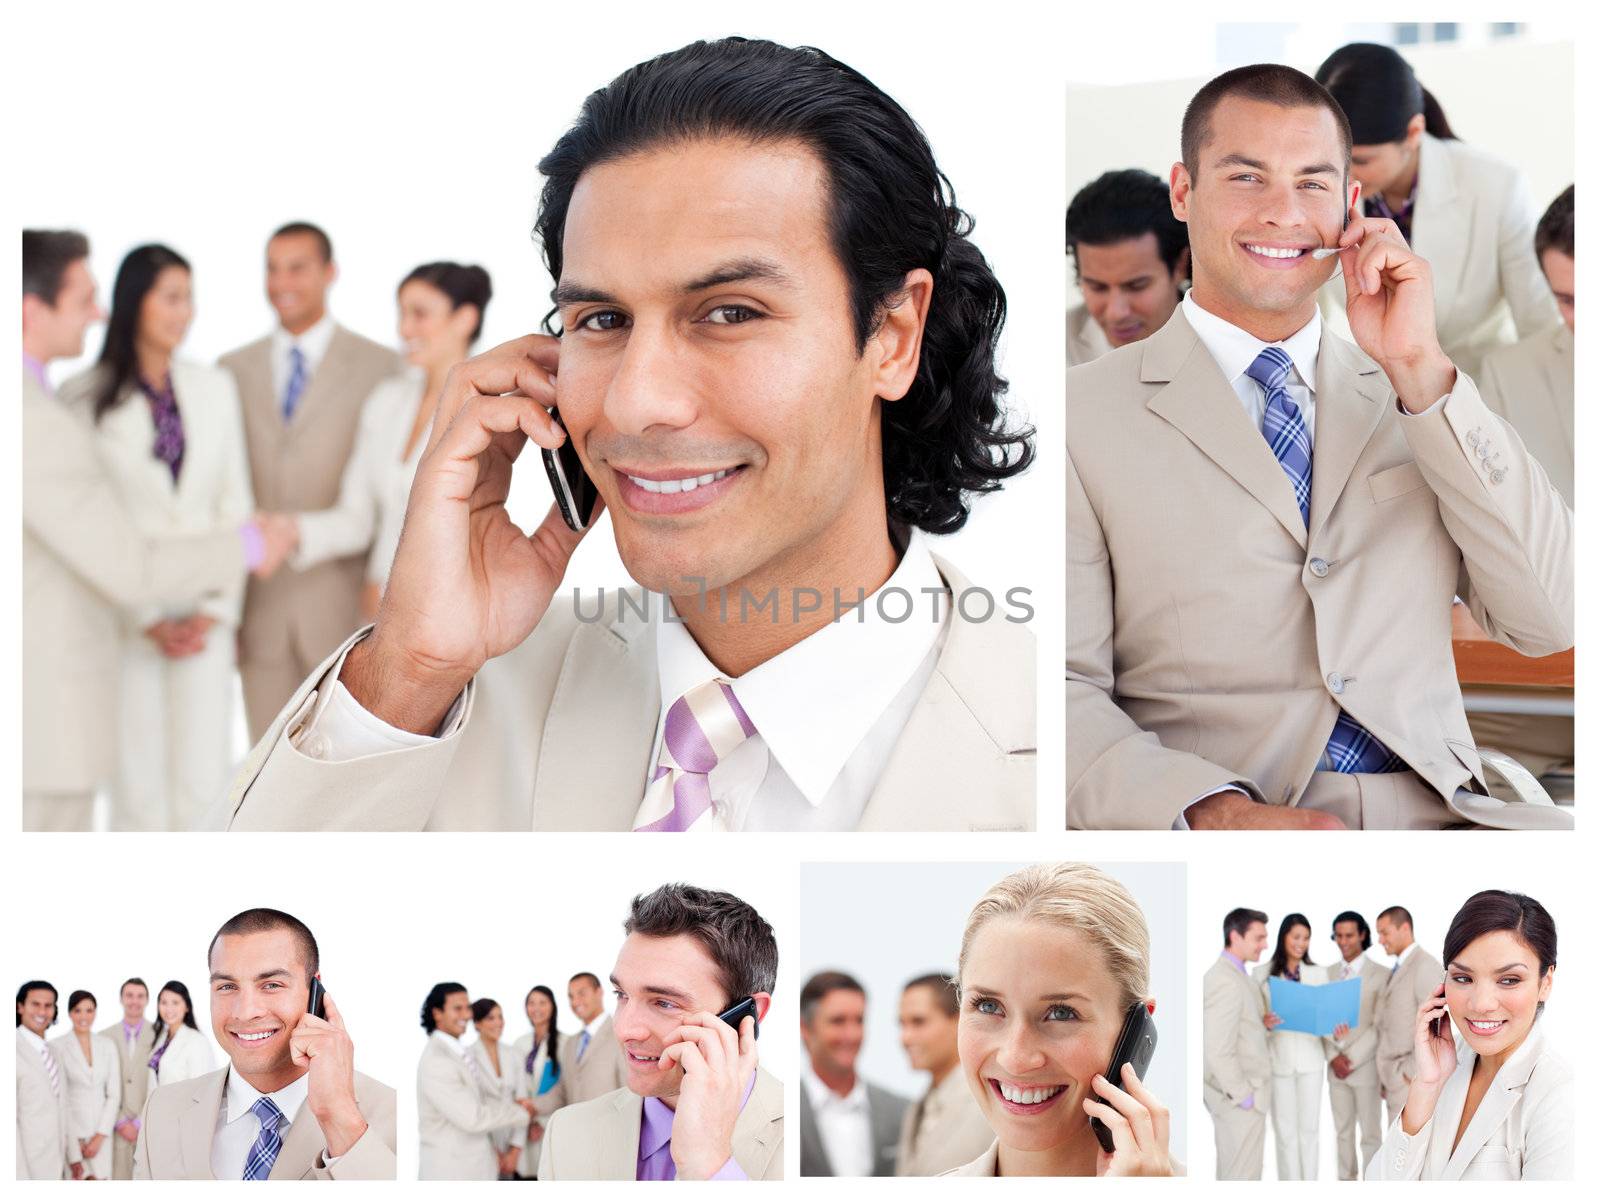 Collage of business people using telephones by Wavebreakmedia